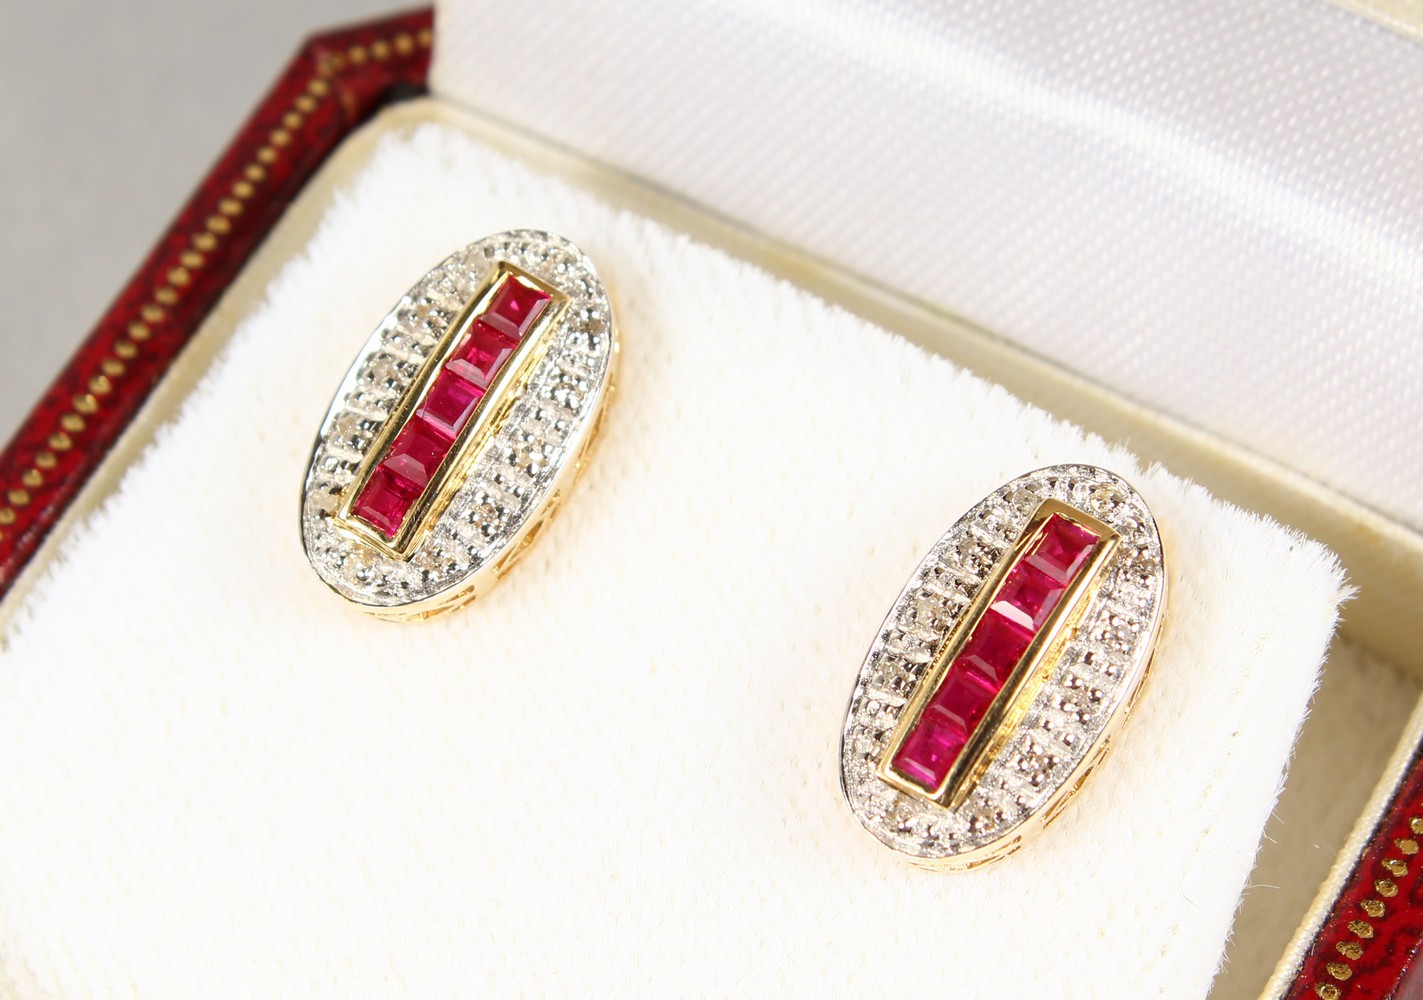 A PAIR OF 9CT GOLD, RUBY AND DIAMOND DECO DESIGN EARRINGS.